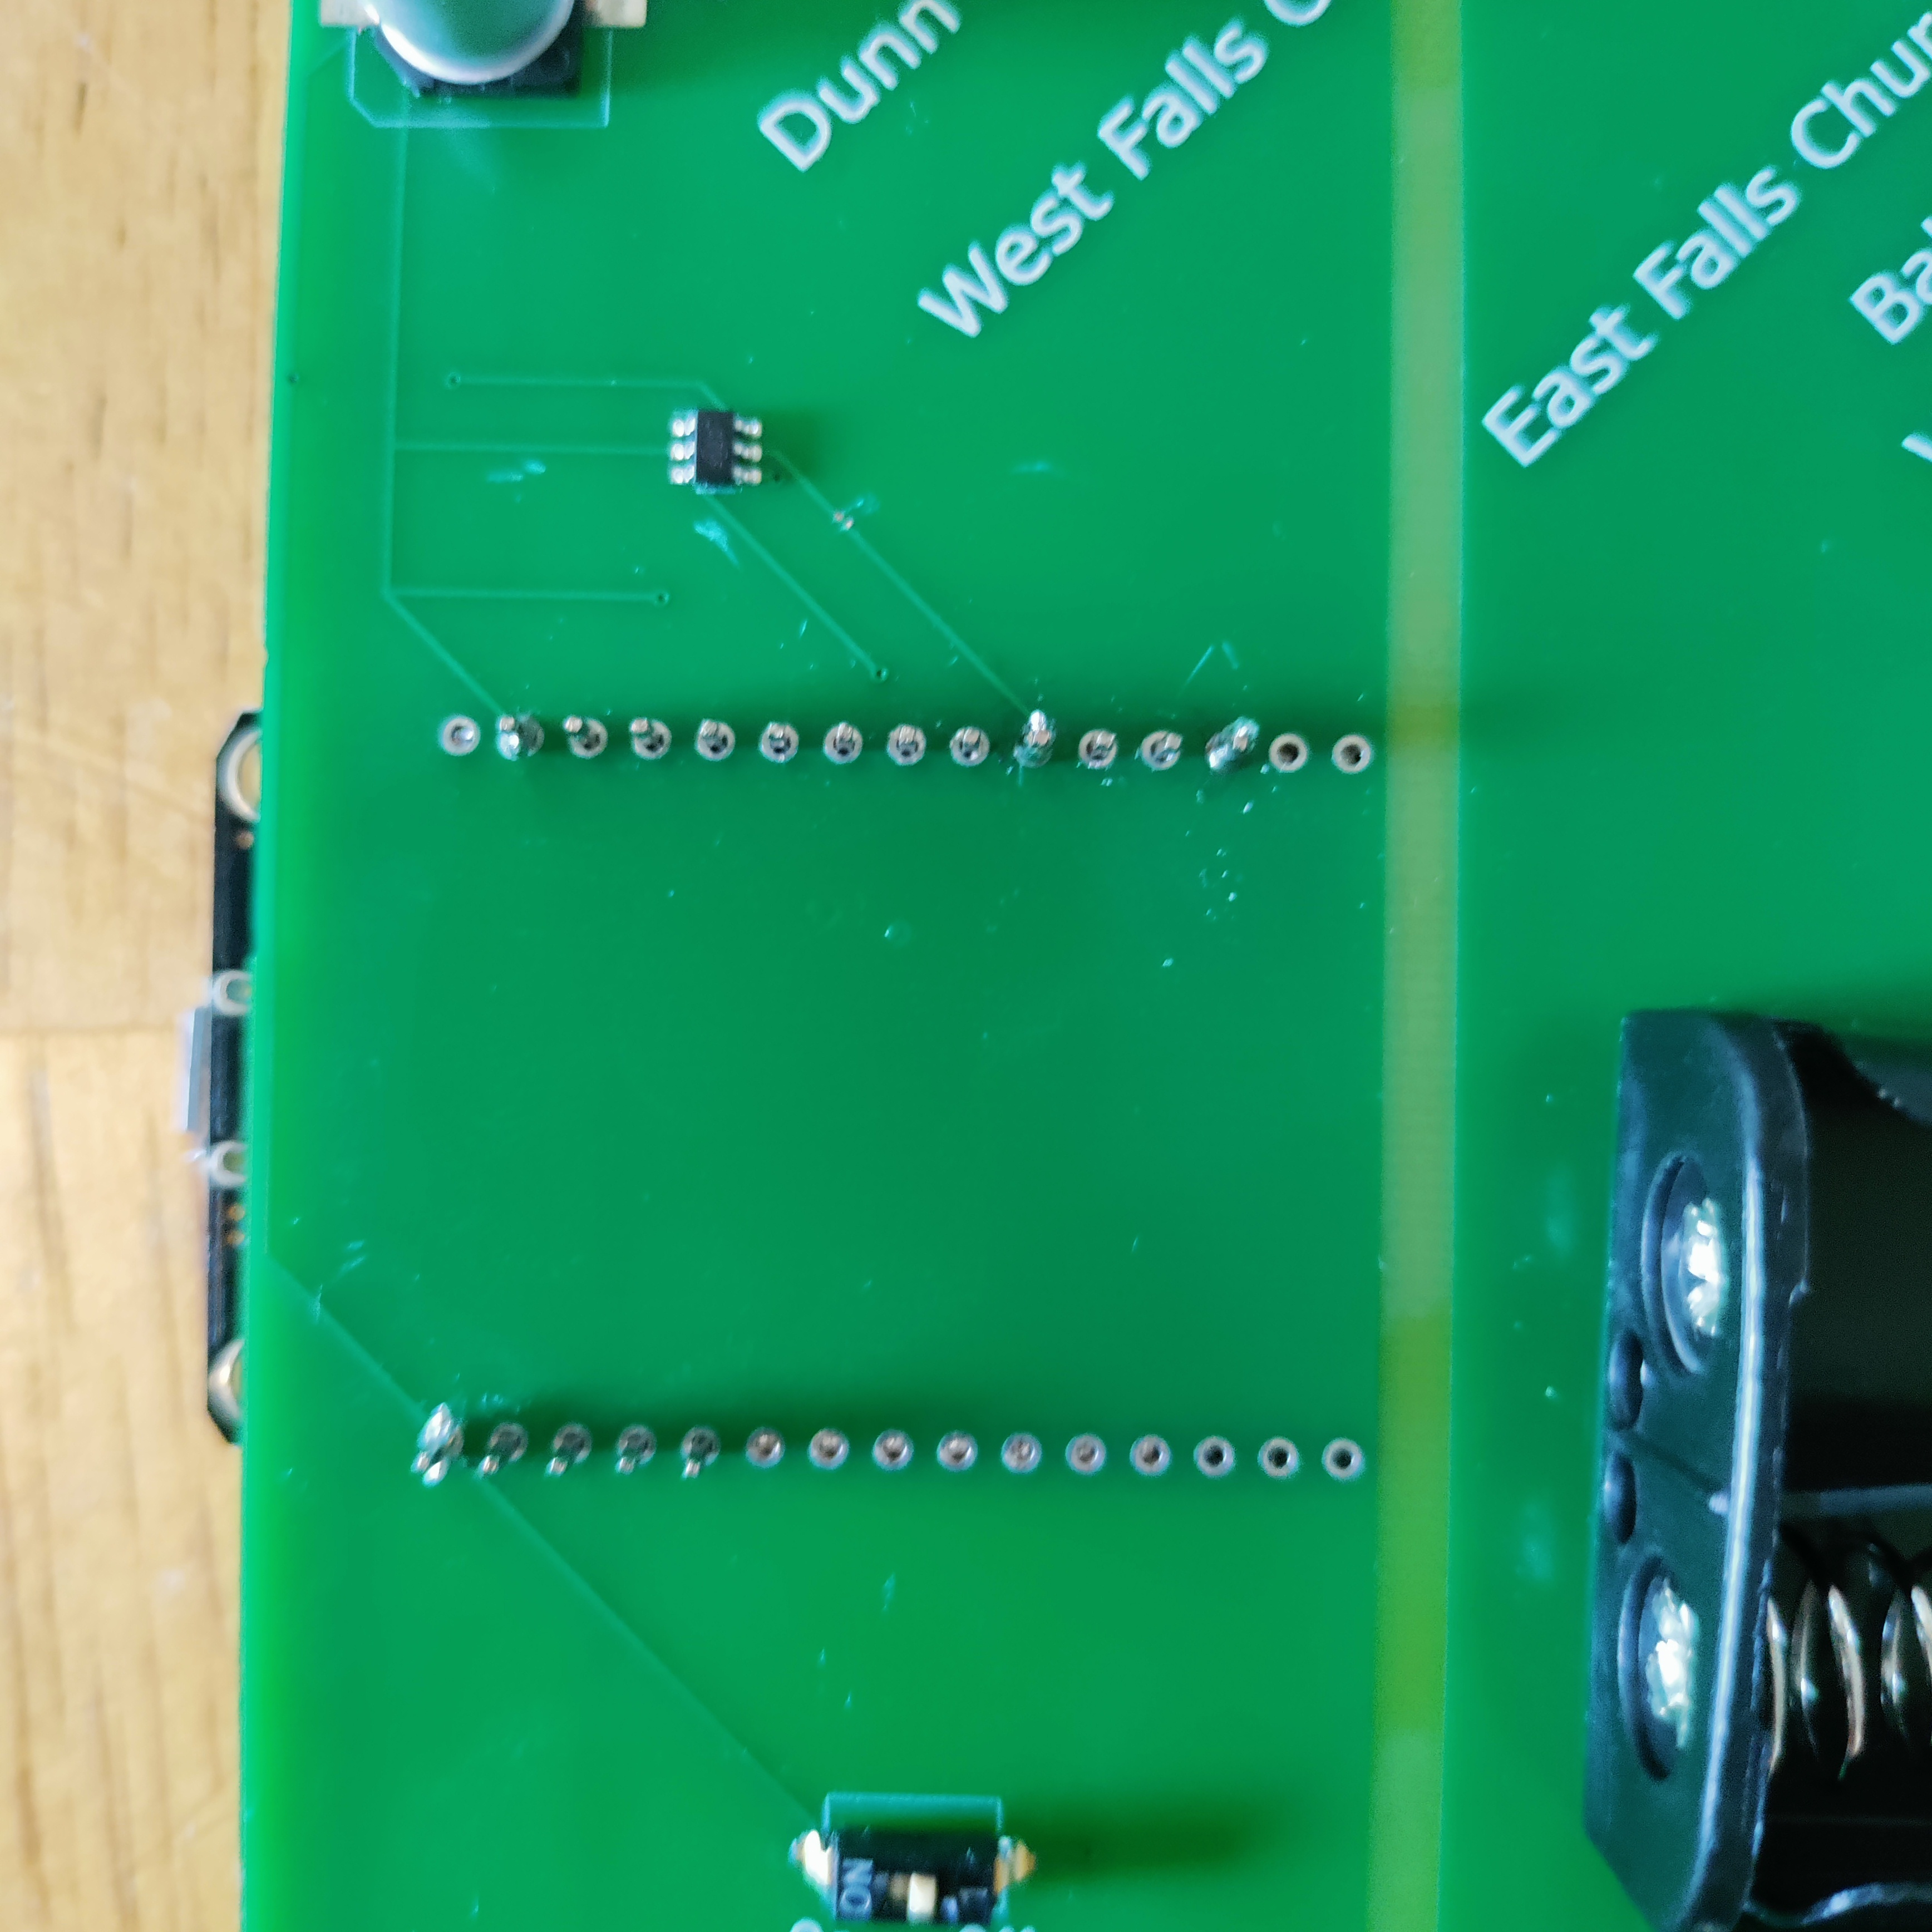 Close-up photo of the through-holes on the front of the board where the chip is soldered on, showing heat marks and pins that were cut off to allow an easier connection.